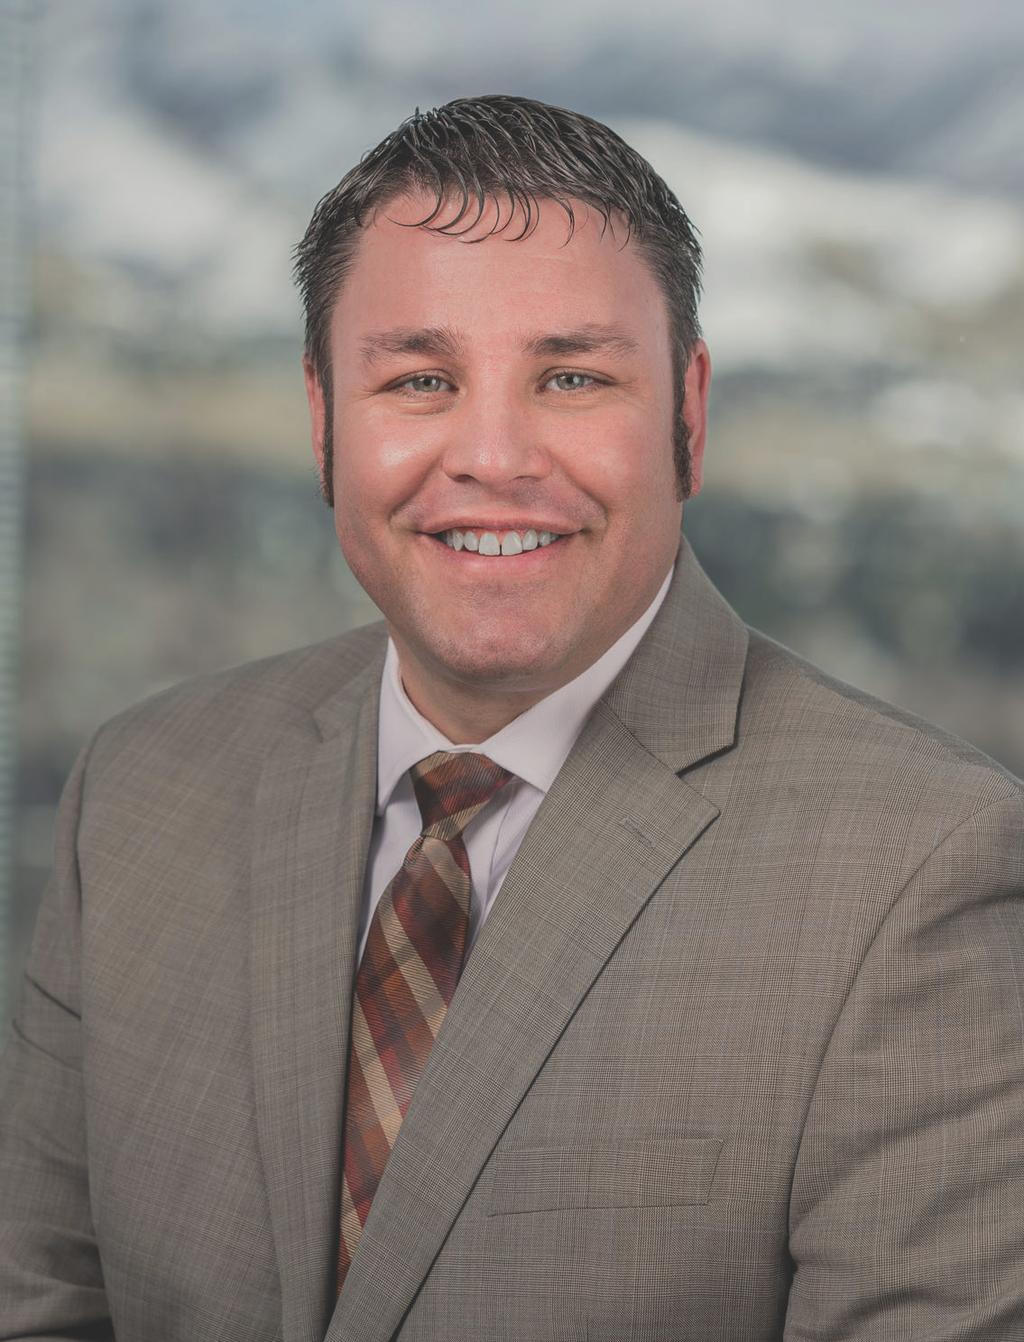 He has represented governmental entities and Healthcare Law their employees through the Utah Local Government Trust, Utah Counties Litigation Insurance Pool, Utah Risk Management Mutual Association,